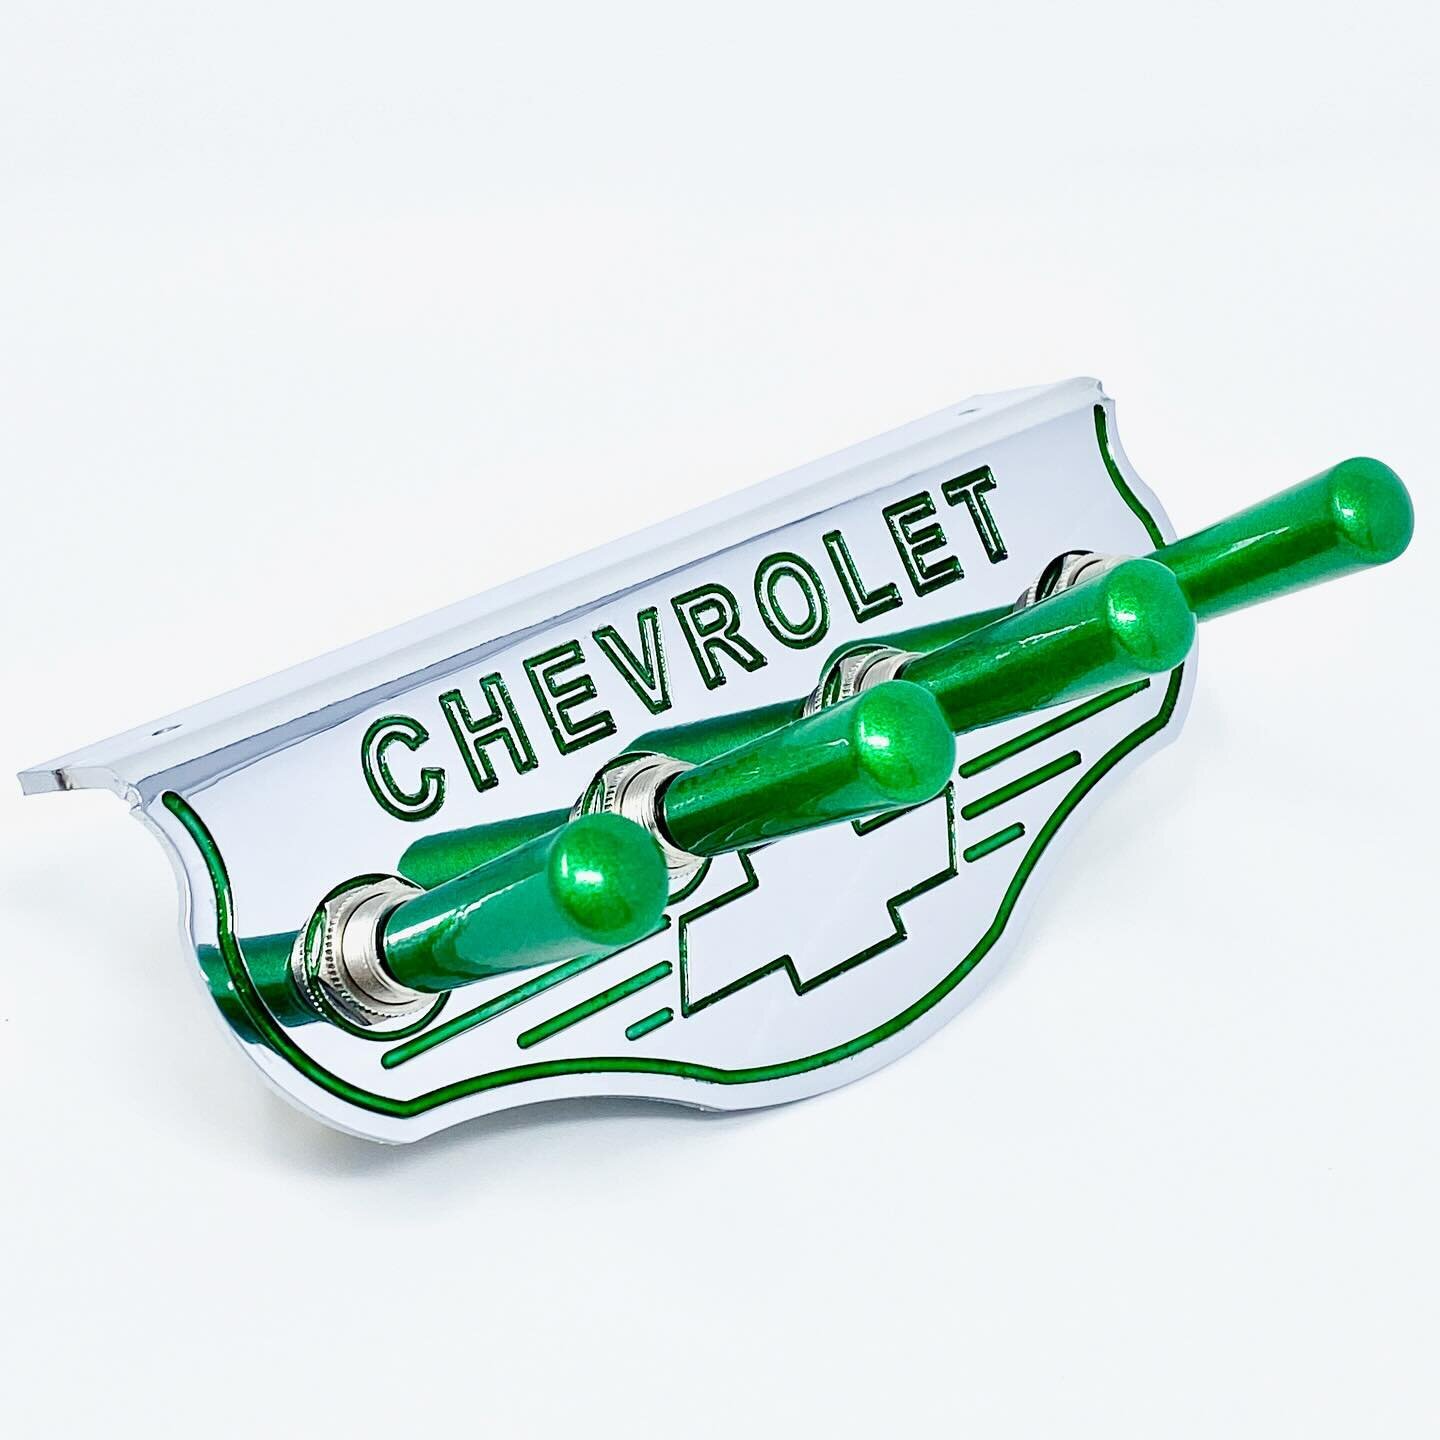 Check it out! Chevrolet Chrome 4 Hole Switch Panel Plate Pinstriped Candy Green with our Candy Green Smooth, Billet, and Billet &ldquo;Extended&rdquo; Toggle Switch Extensions 🔥 Visit famswitches.com to create your own full setup! Any questions or c